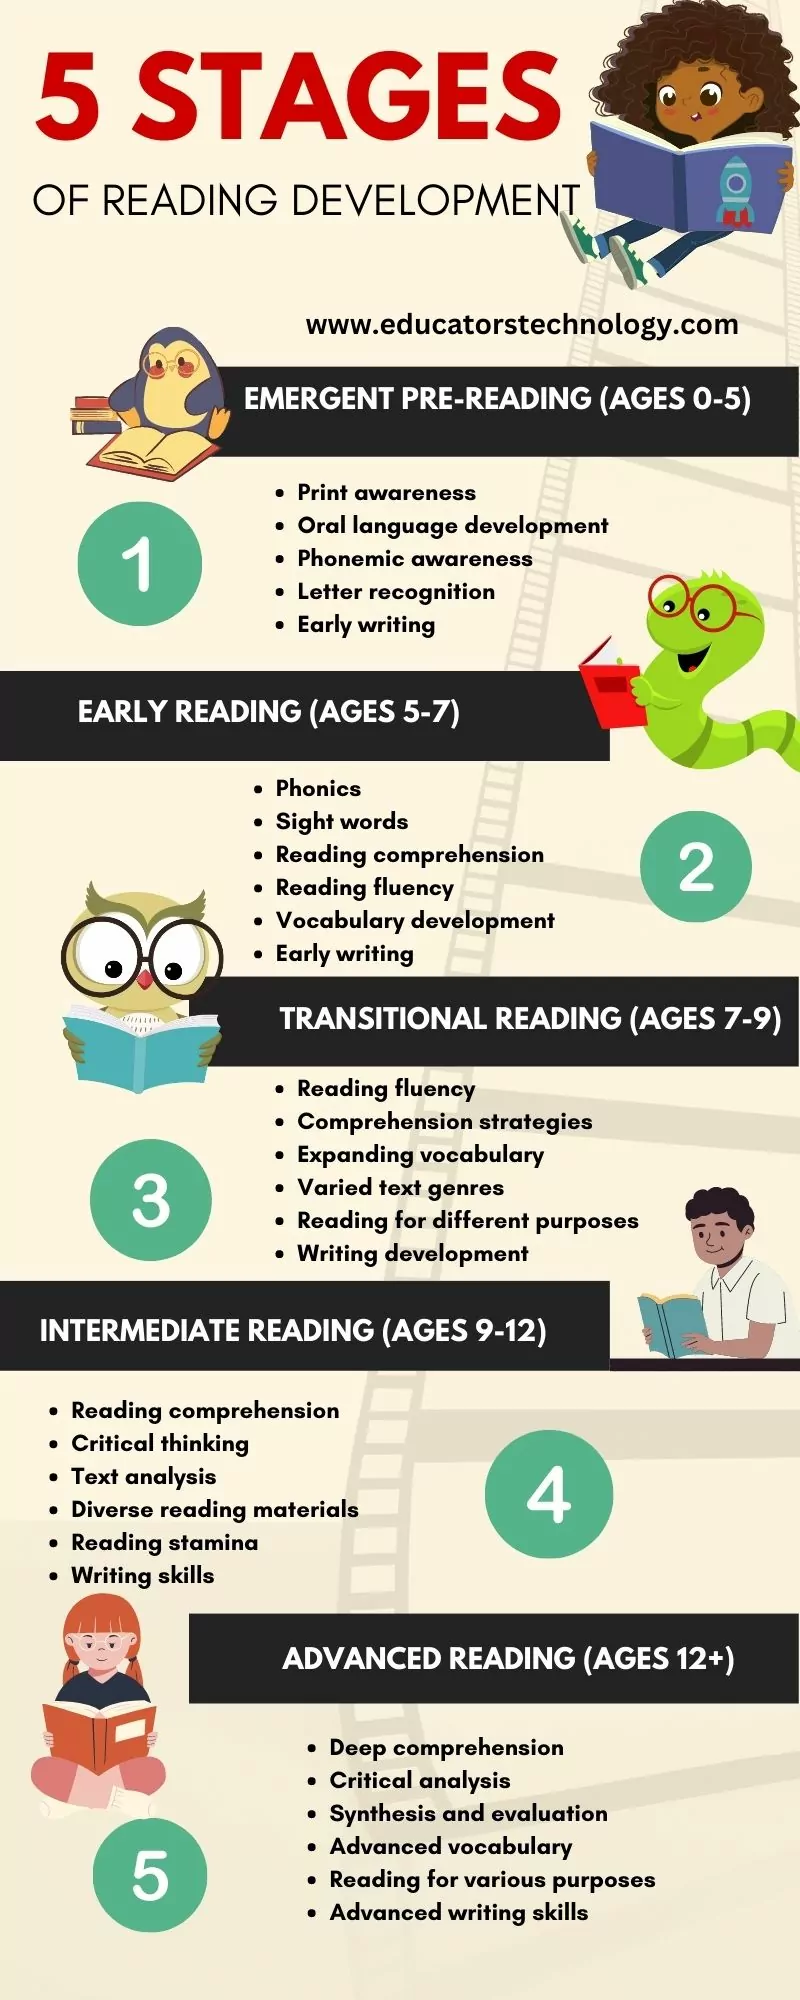 Stages of reading development